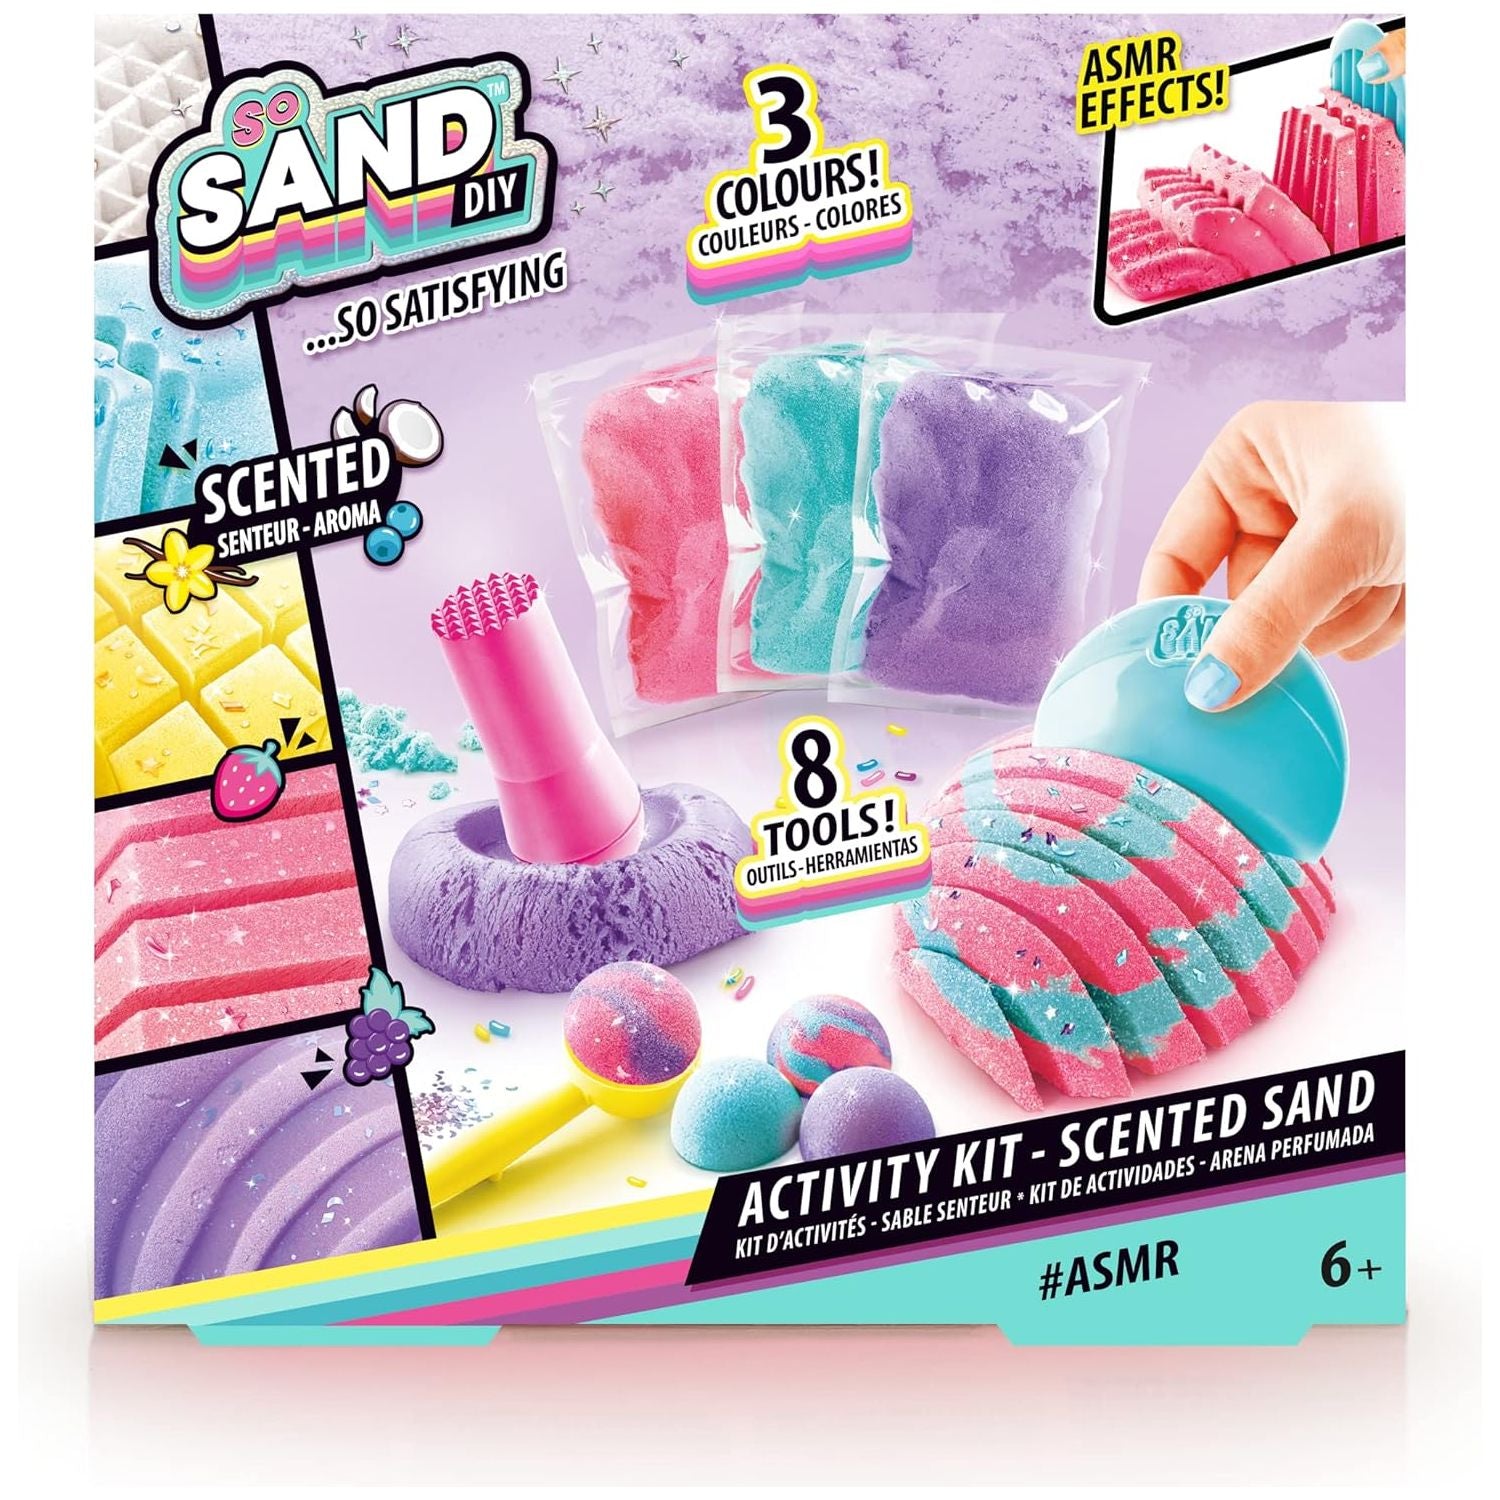 Canal Toys So Sand DIY Activity Kit Scented Sand